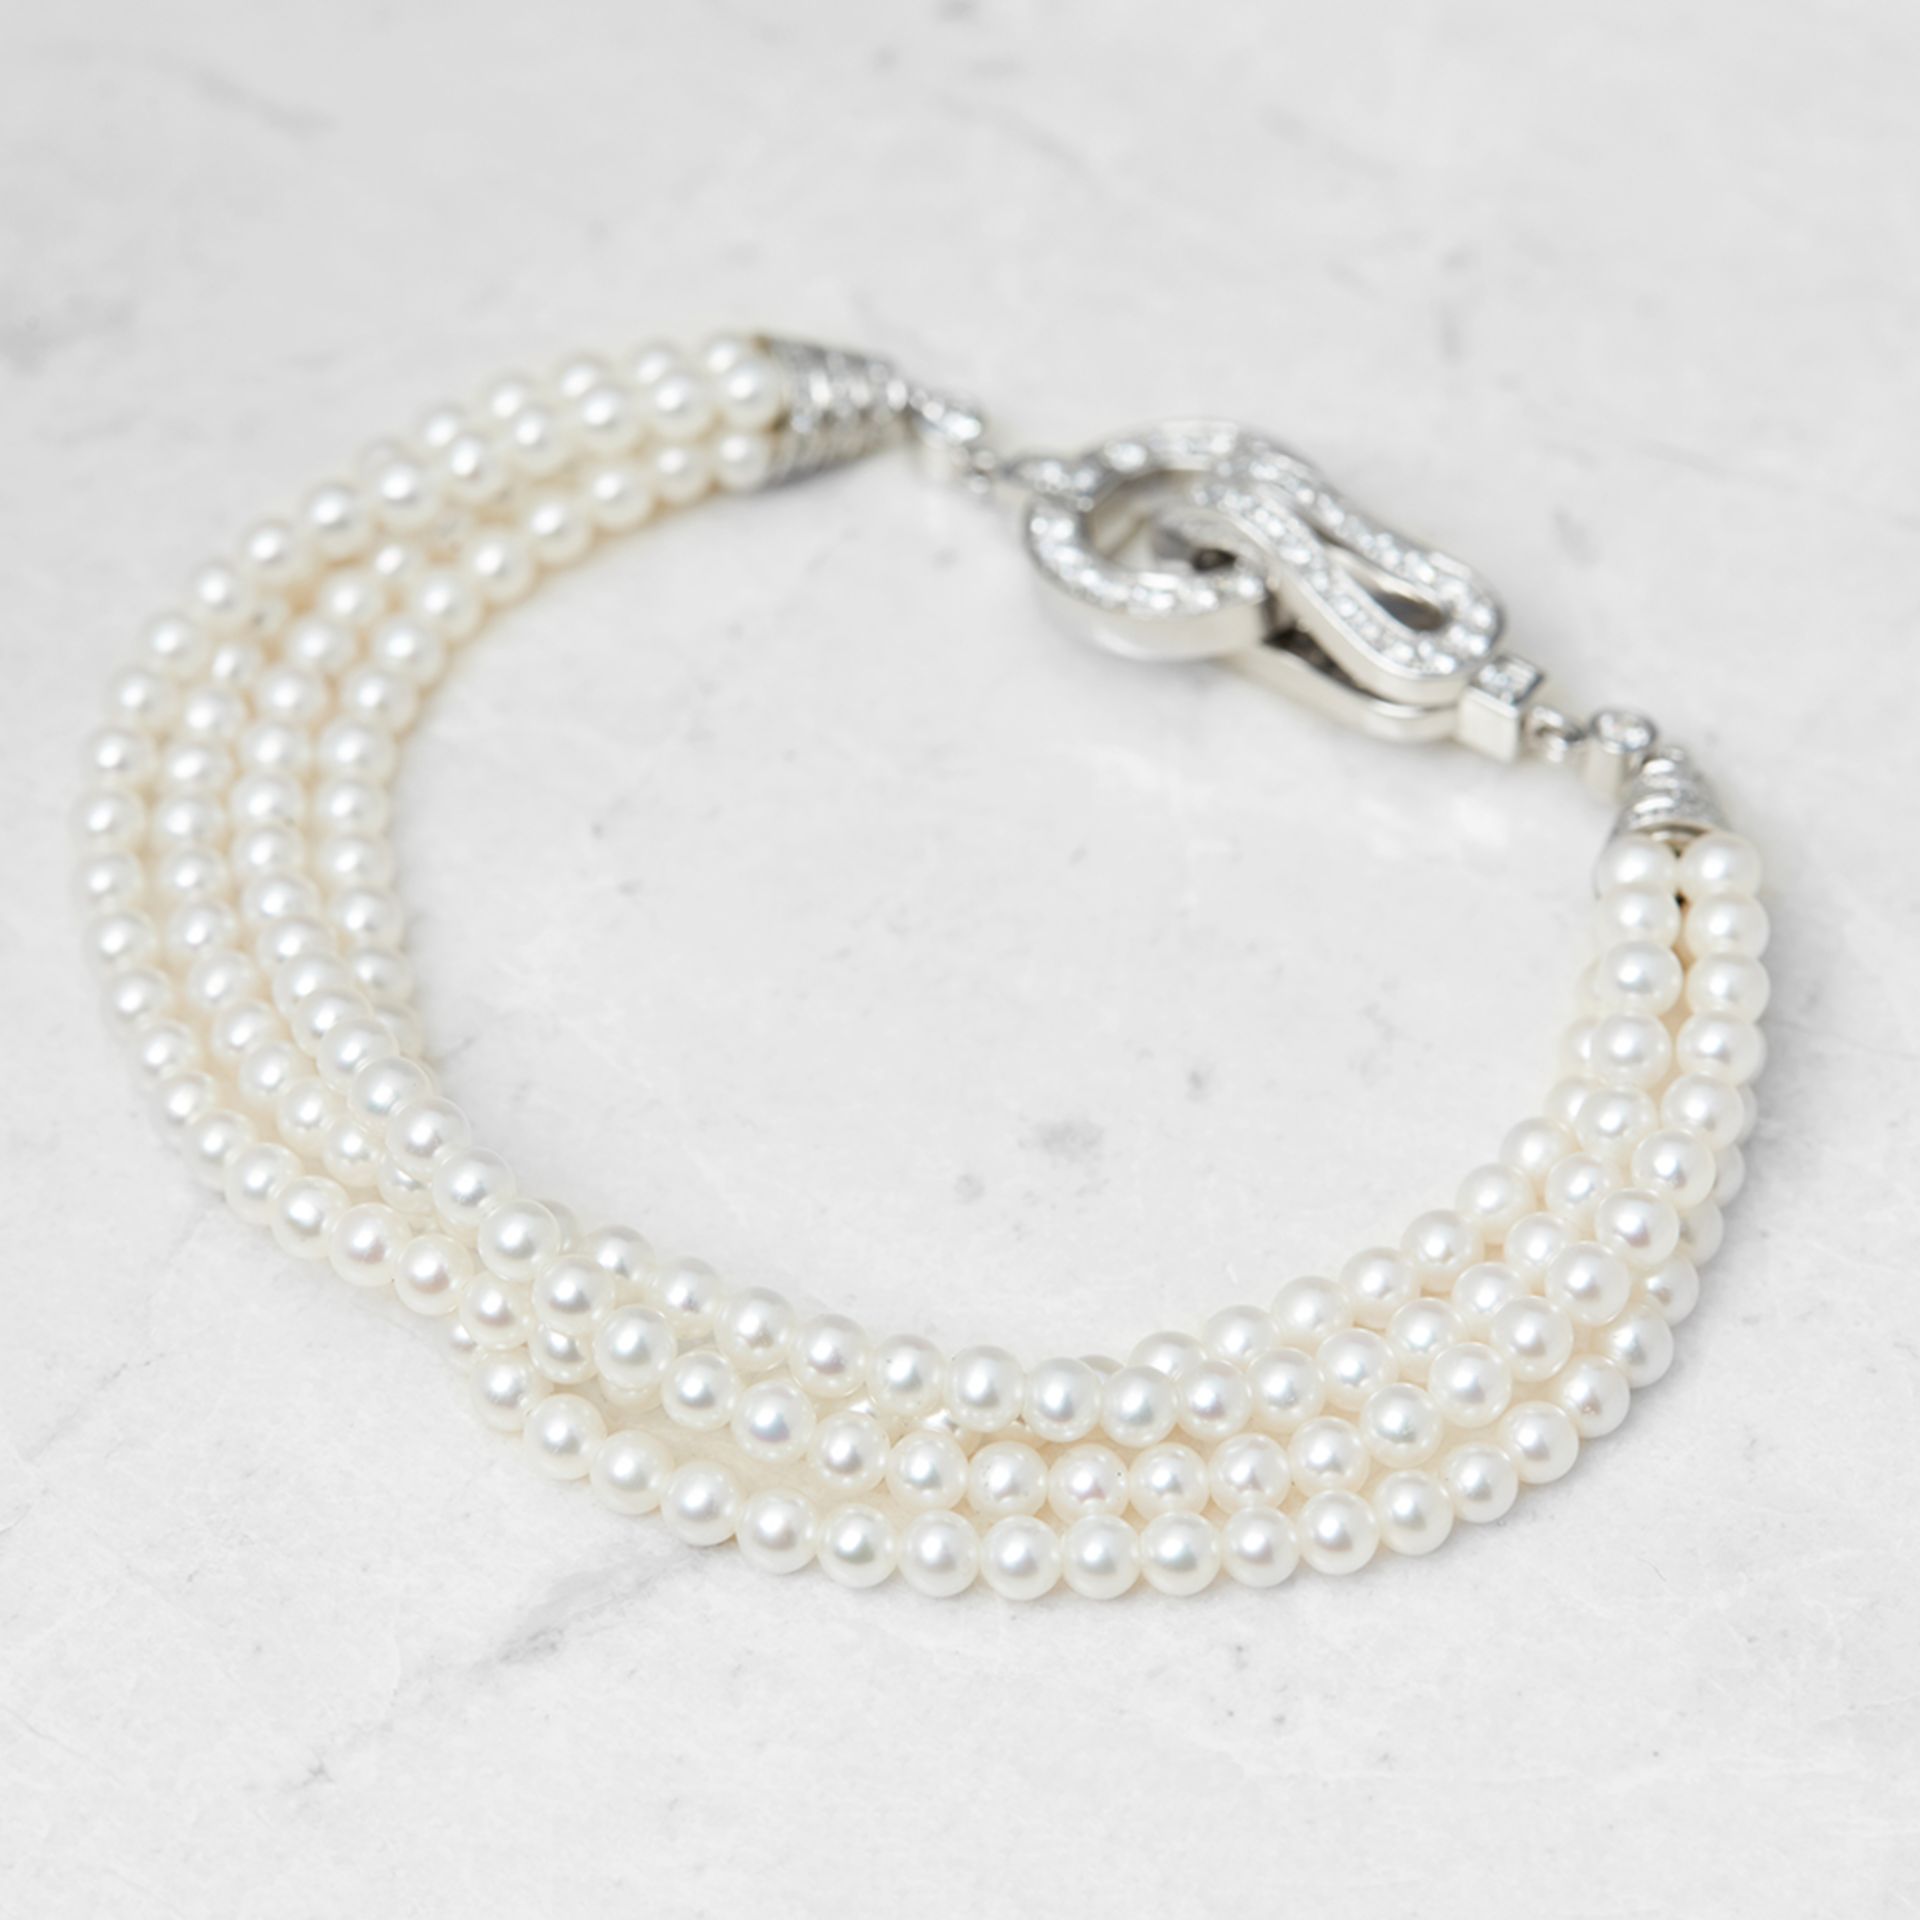 Cartier 18k White Gold Cultured Pearl & 1.02ct Diamond Agrafe Bracelet - Image 2 of 6